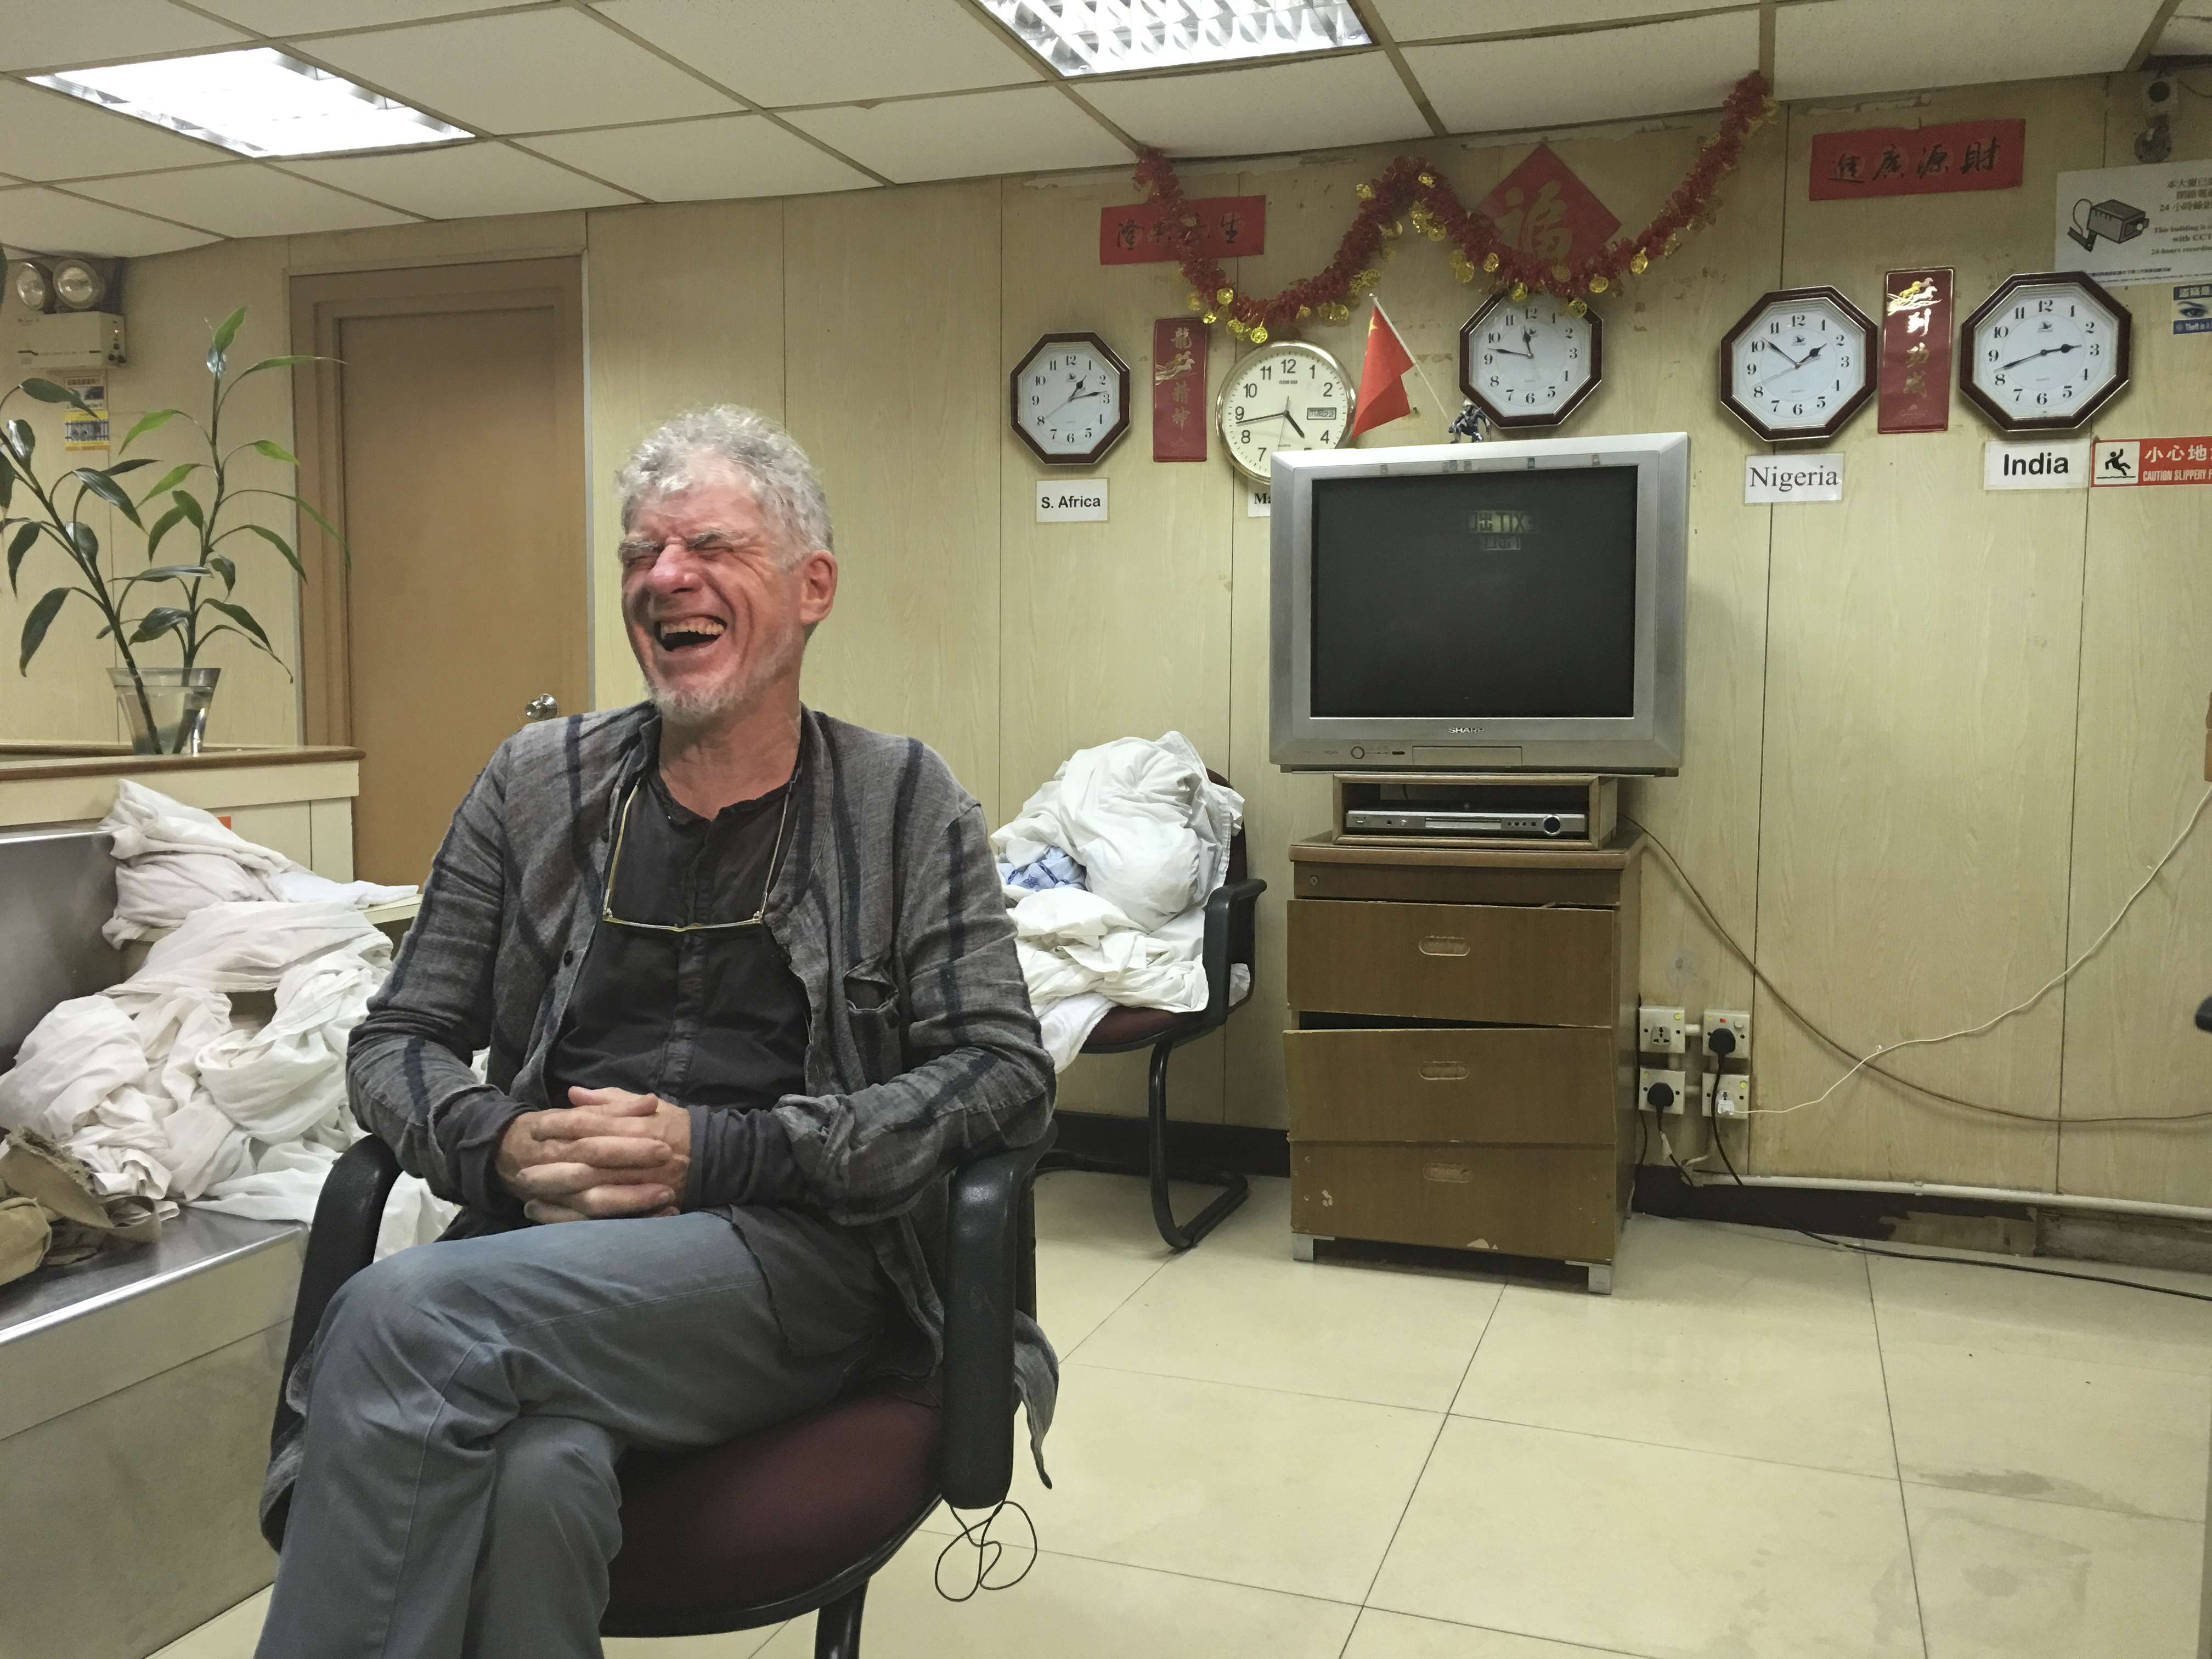 Hong Kong-based Australian cinematographer Christopher Doyle in Chungking Mansions. Photos: Kylie Knott